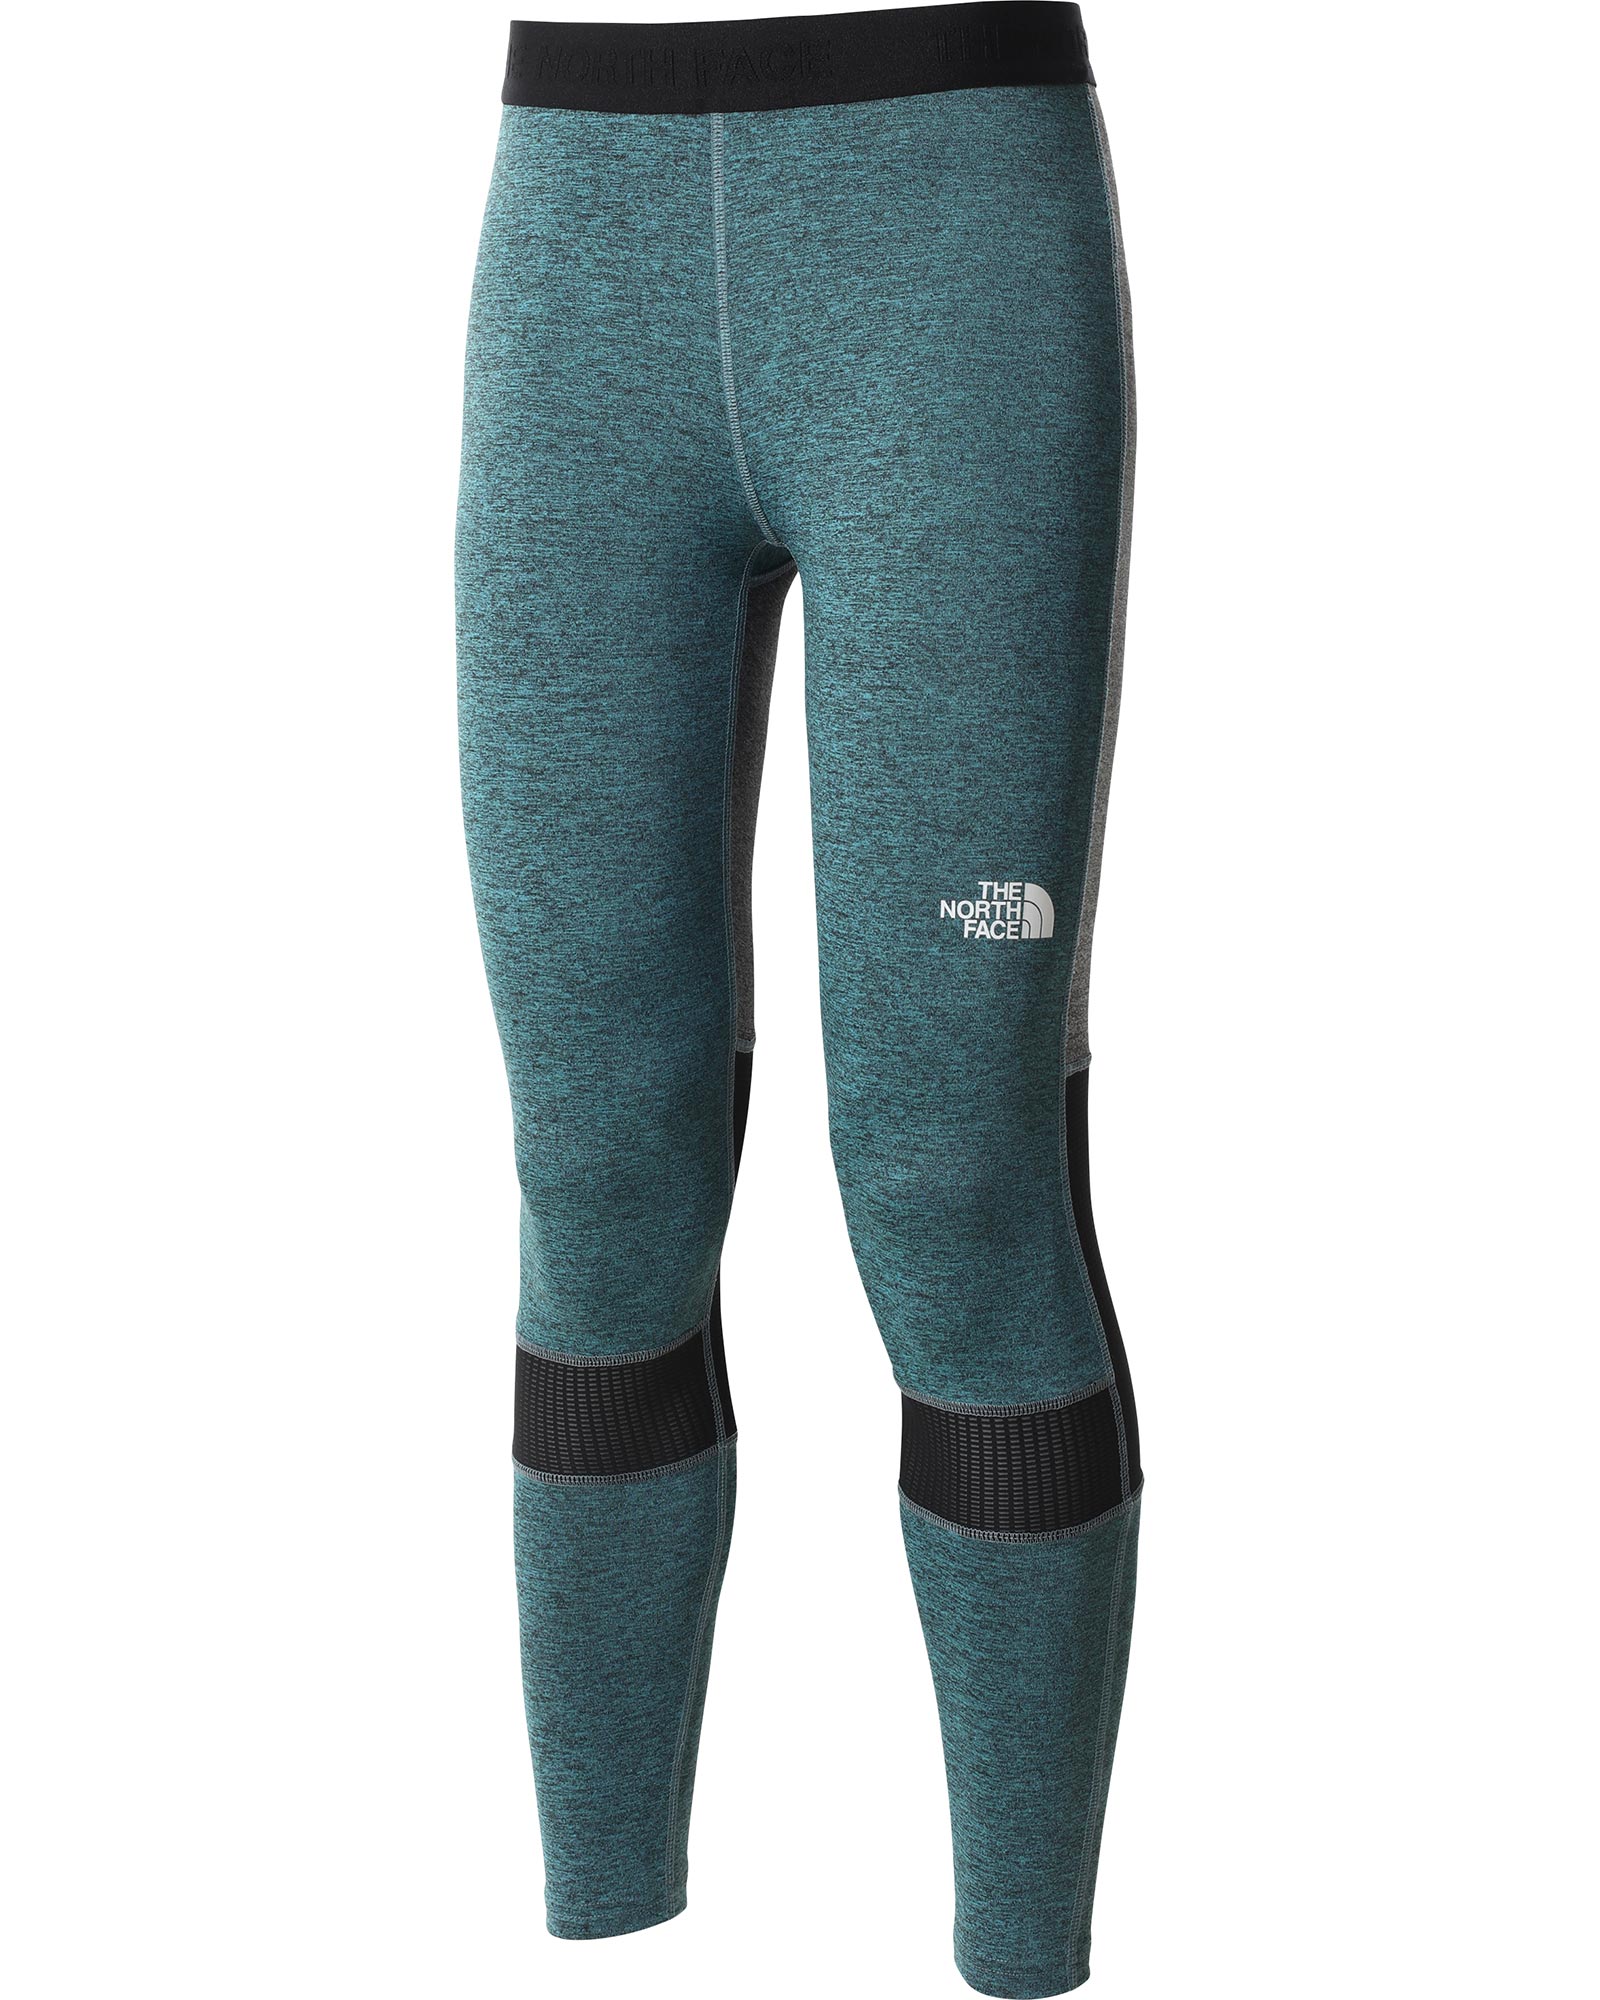 The North Face MA Women’s Tights - Goblin Blue Heather XS